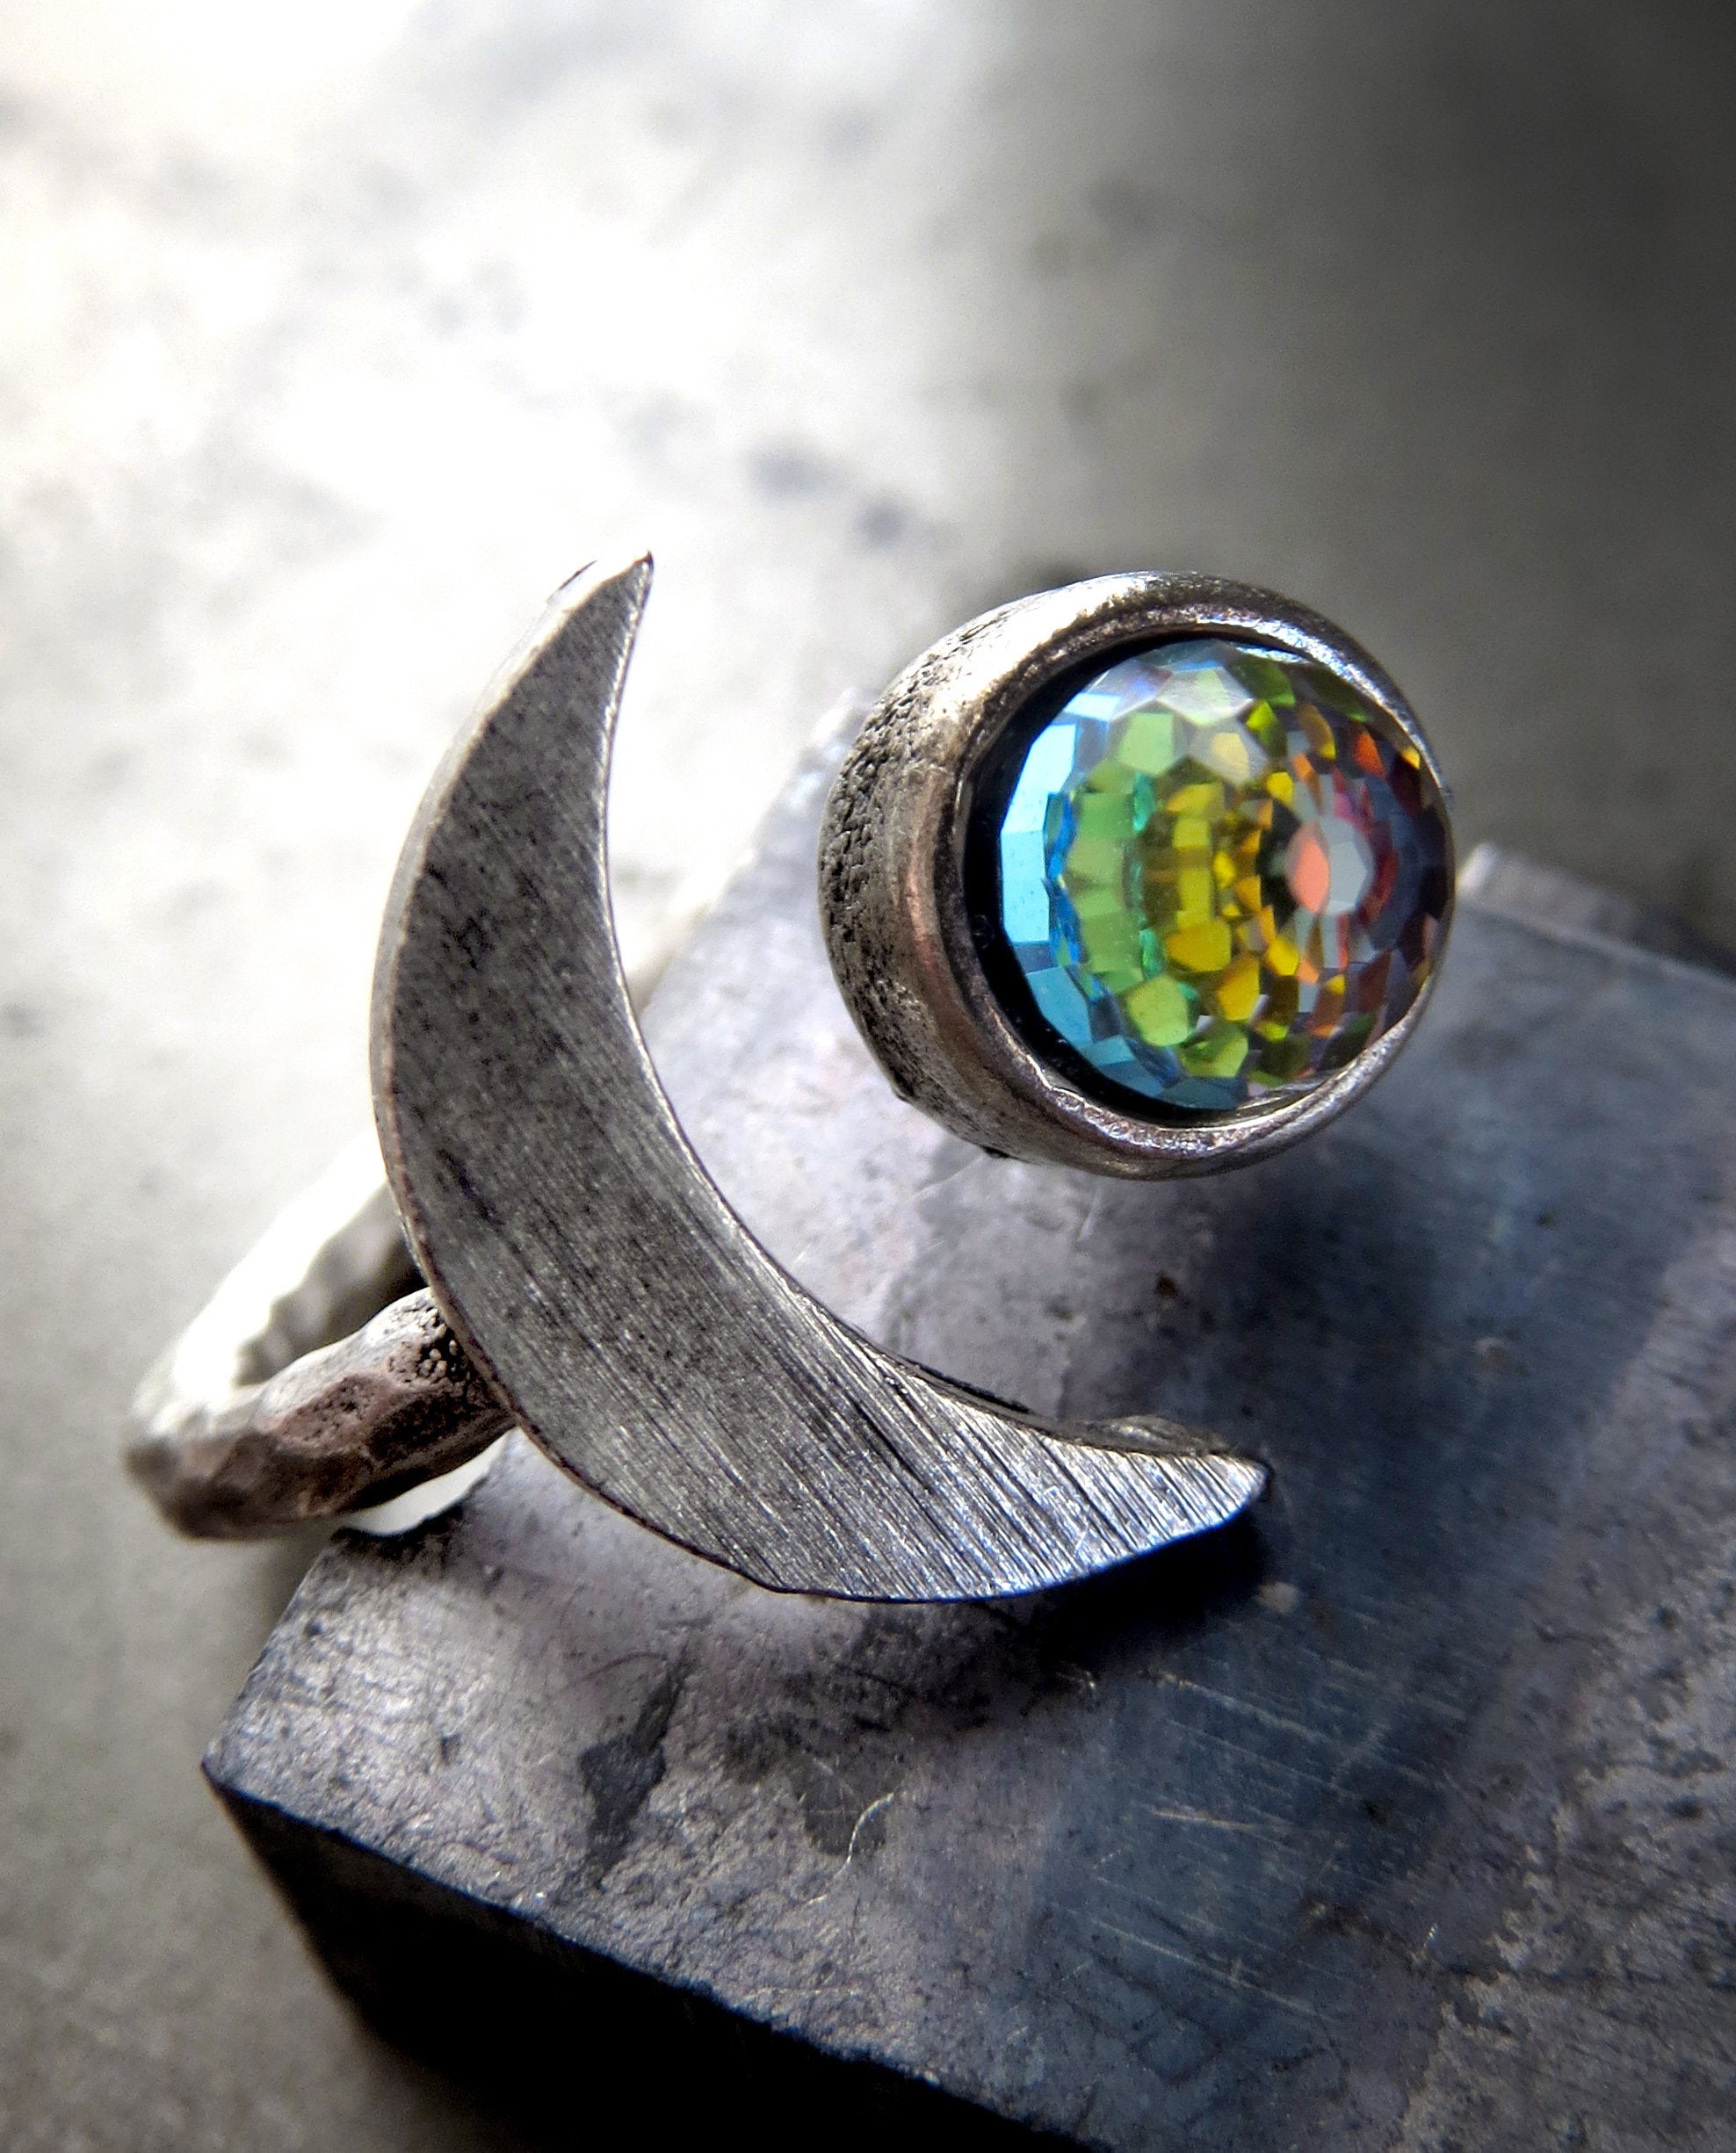 CELESTIAL - Silver Cresent Moon Ring with Vintage Rainbow Swarovski Crystal - Rainbow Jewelry for Teen Girl, Teenager, Women - Moon Jewelry